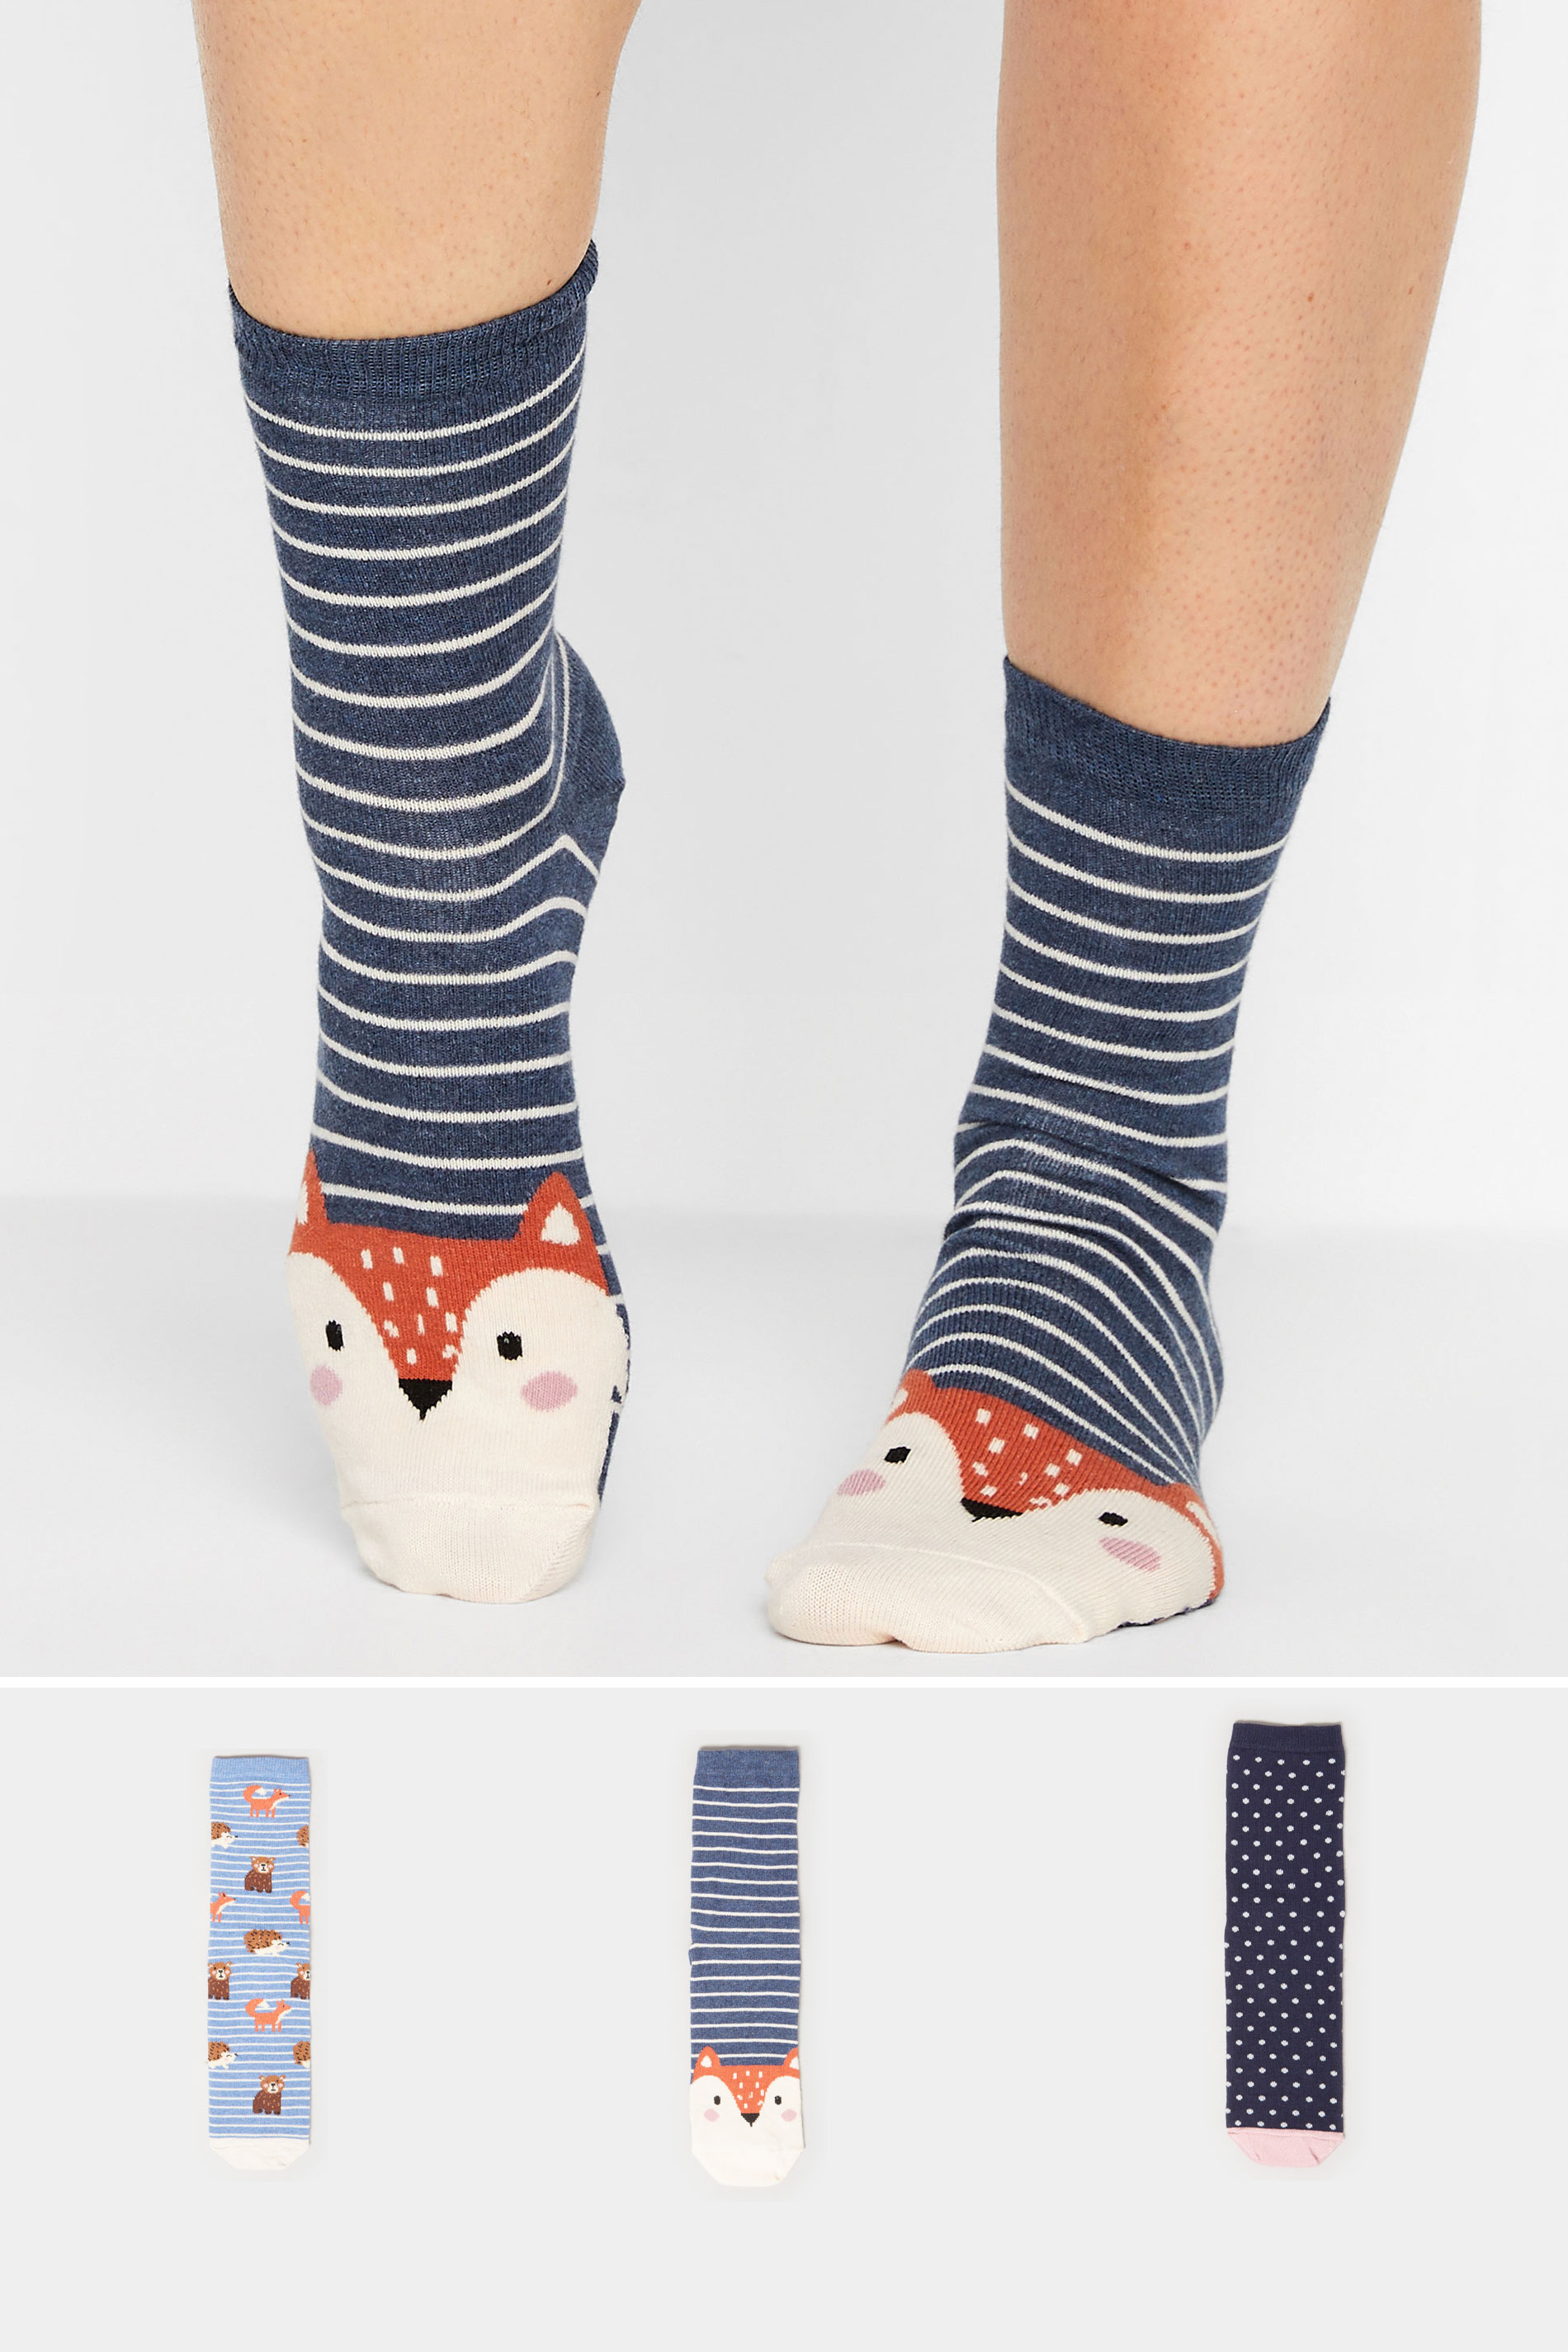 LTS 3 PACK Blue Woodland Animal Ankle Socks | Long Tall Sally 1